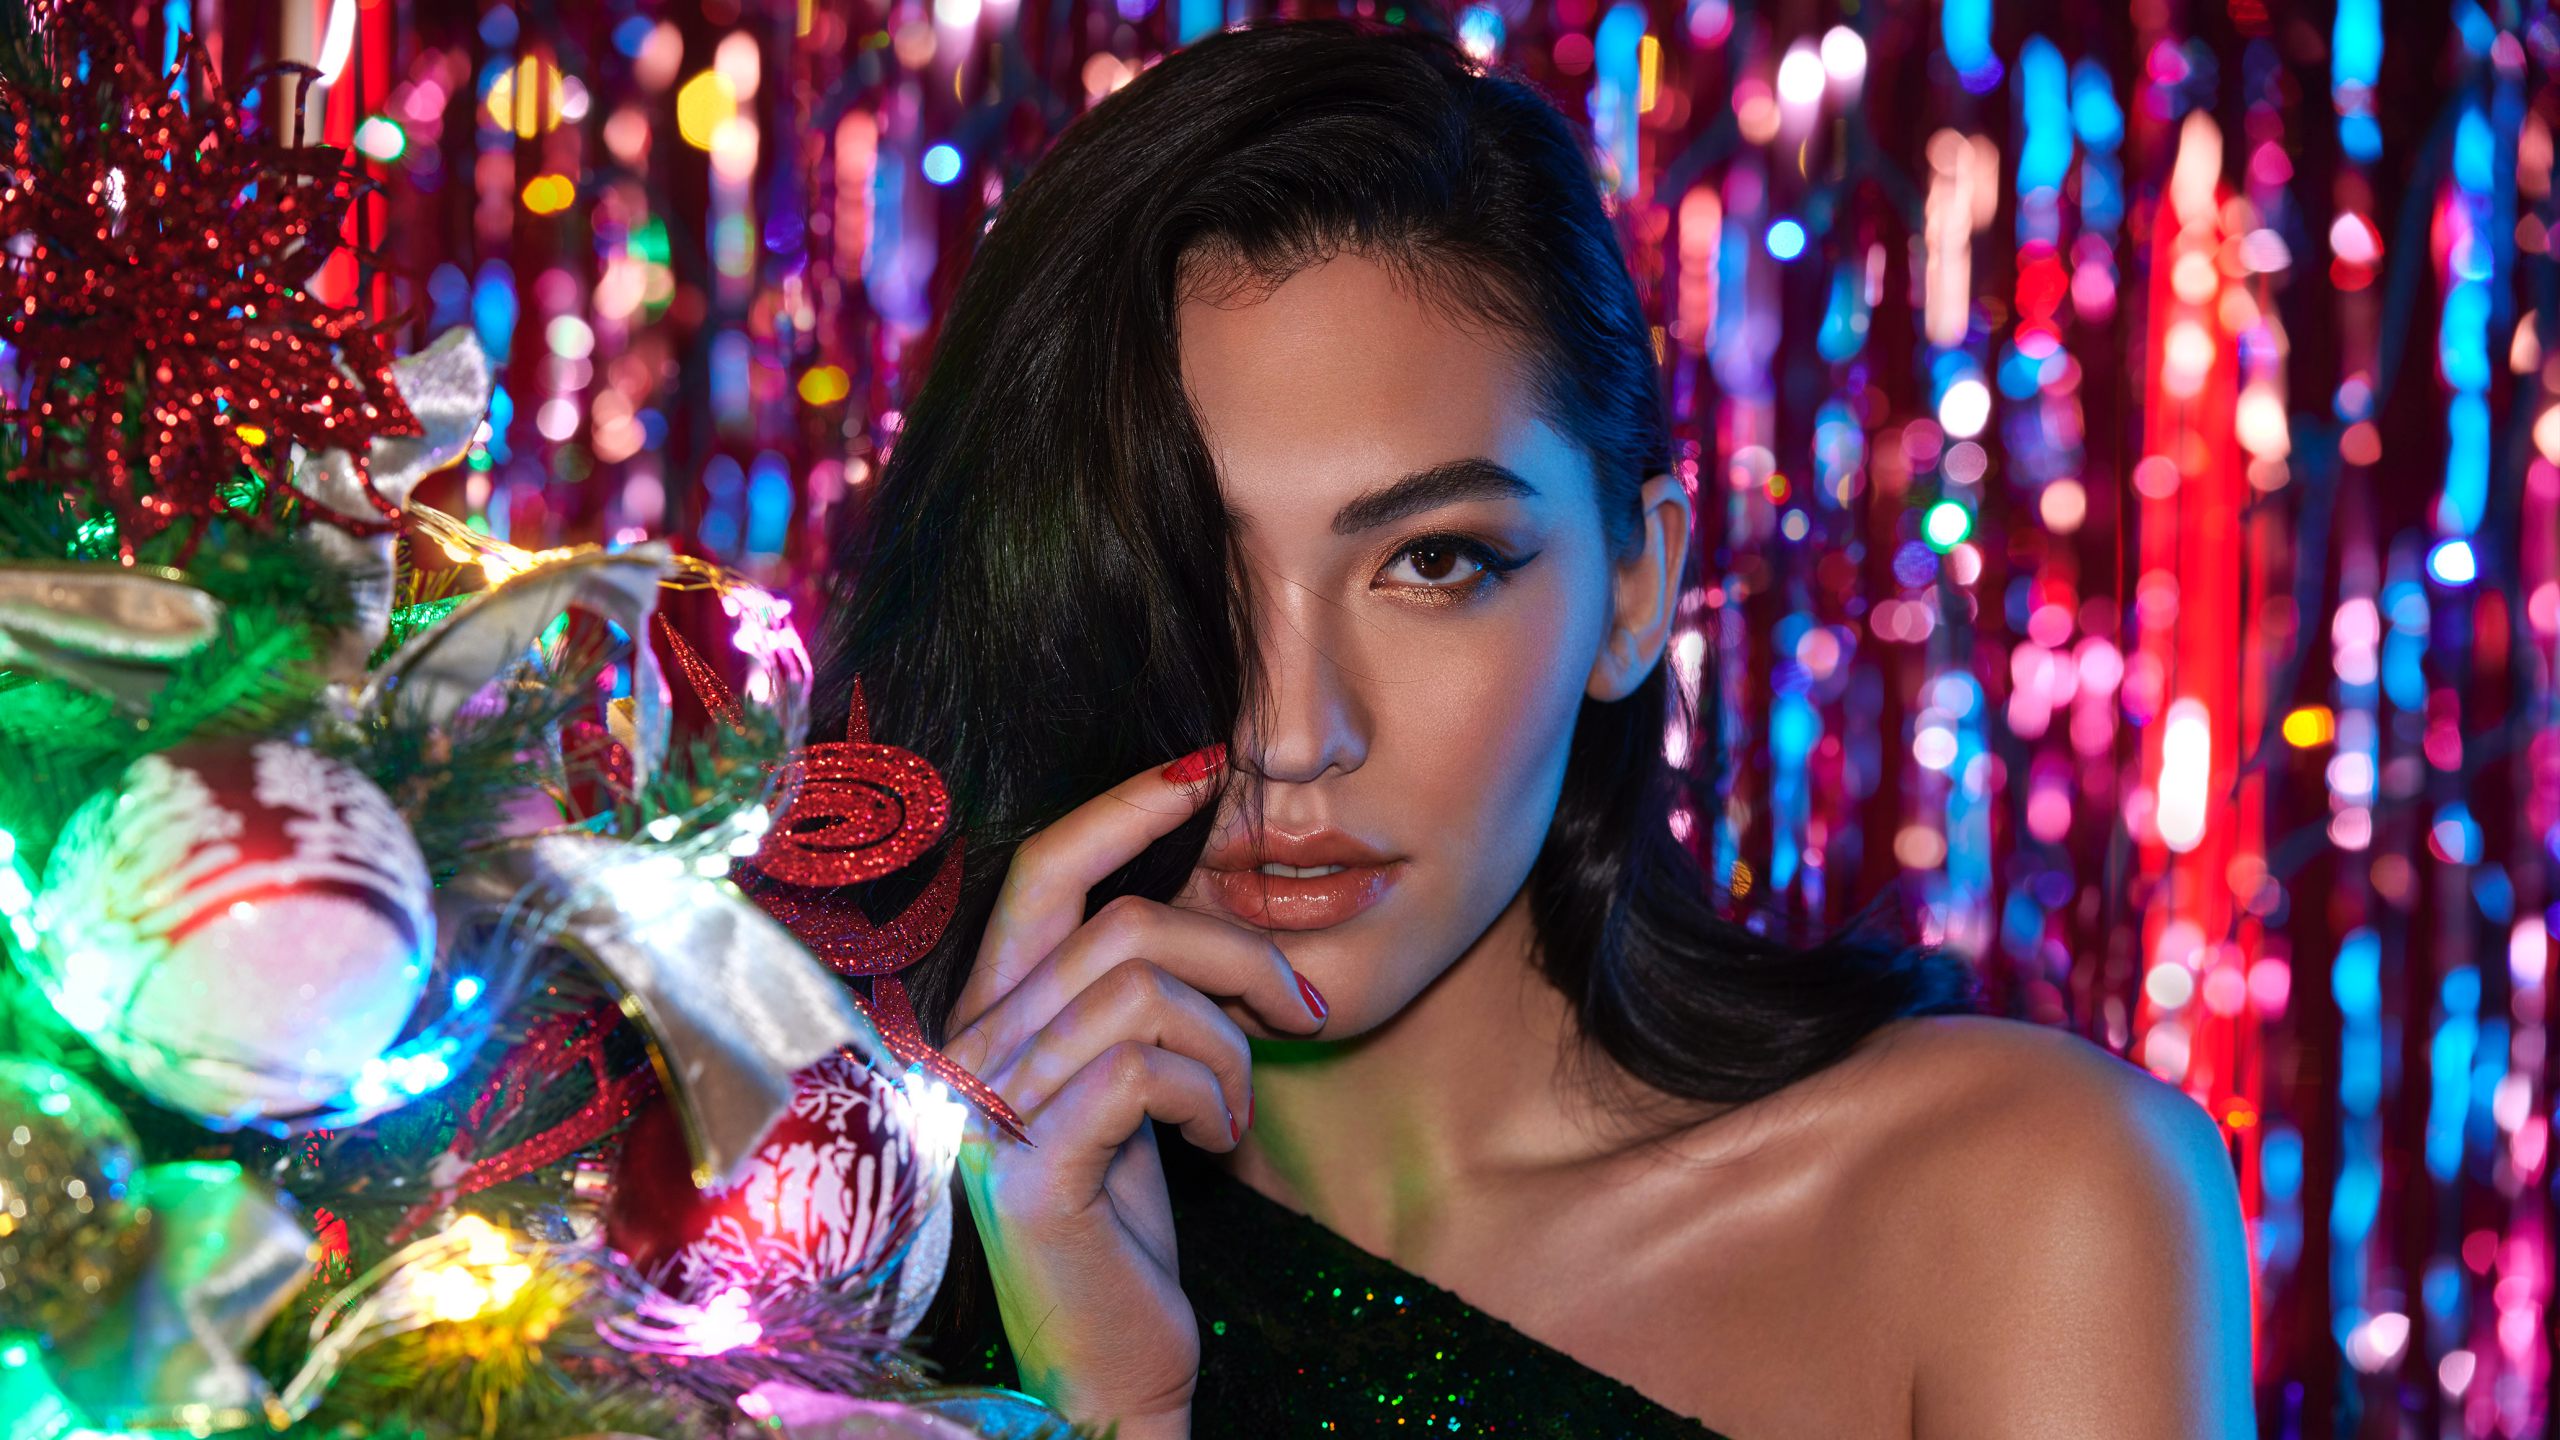 Charlotte Tilbury dazzles us with four bewitching looks for the festive season